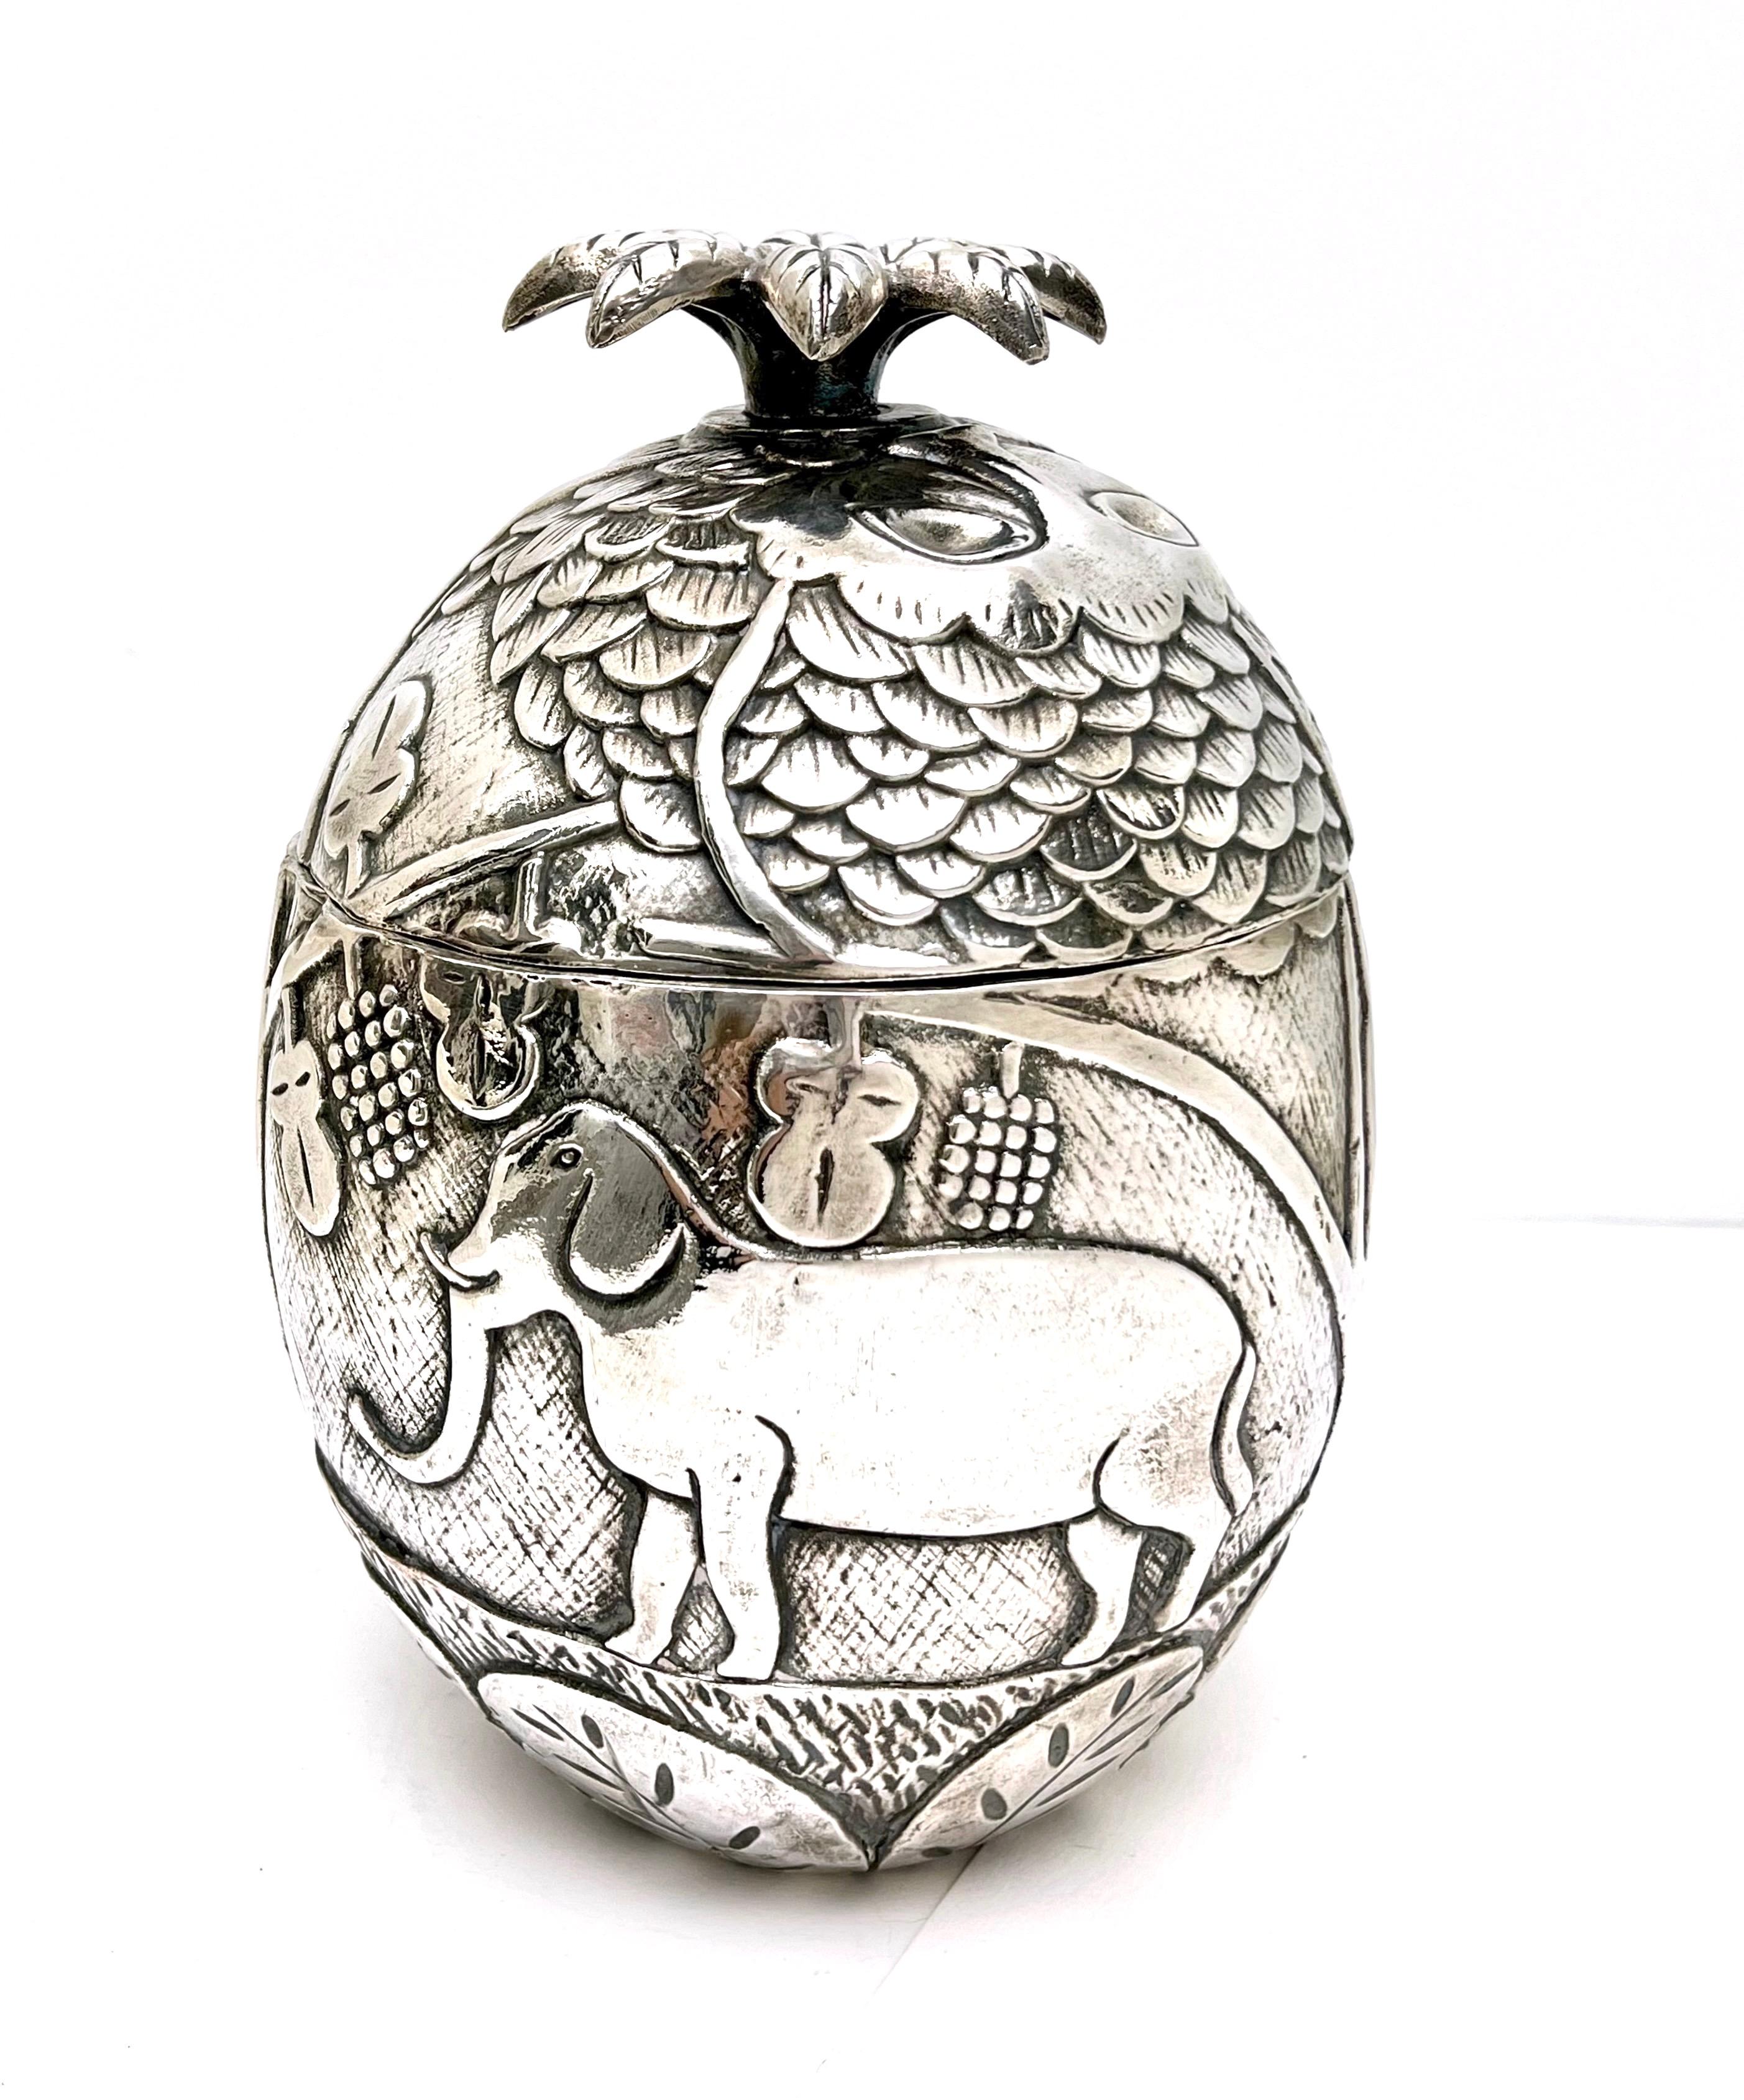 Stunning and unique French Ice Bucket or Wine Cooler with whimsical animals including a Deer, Elephant, Camel and an Owl on top.  In the style of Marc Chagall and his playfulness this is a unique and rare piece.  Top is notched for all the trees and